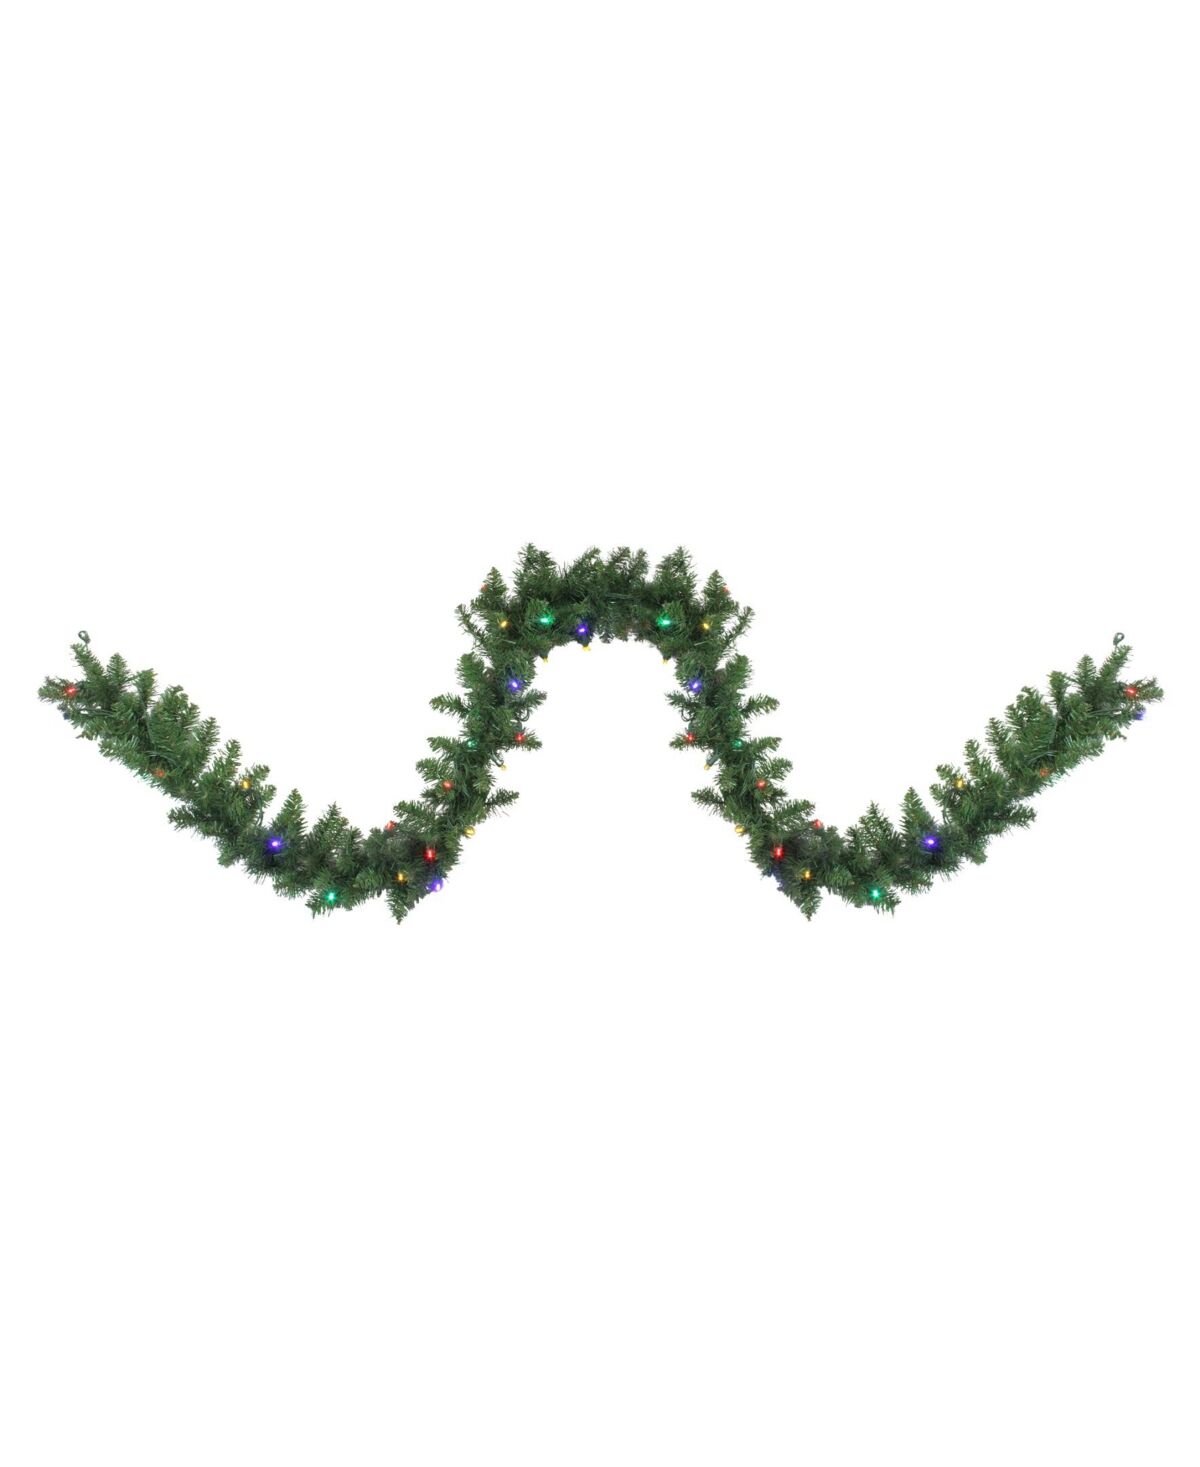 Northlight 9' Pre-Lit Northern Pine Artificial Christmas Garland - Multi-Color Led Lights - Green